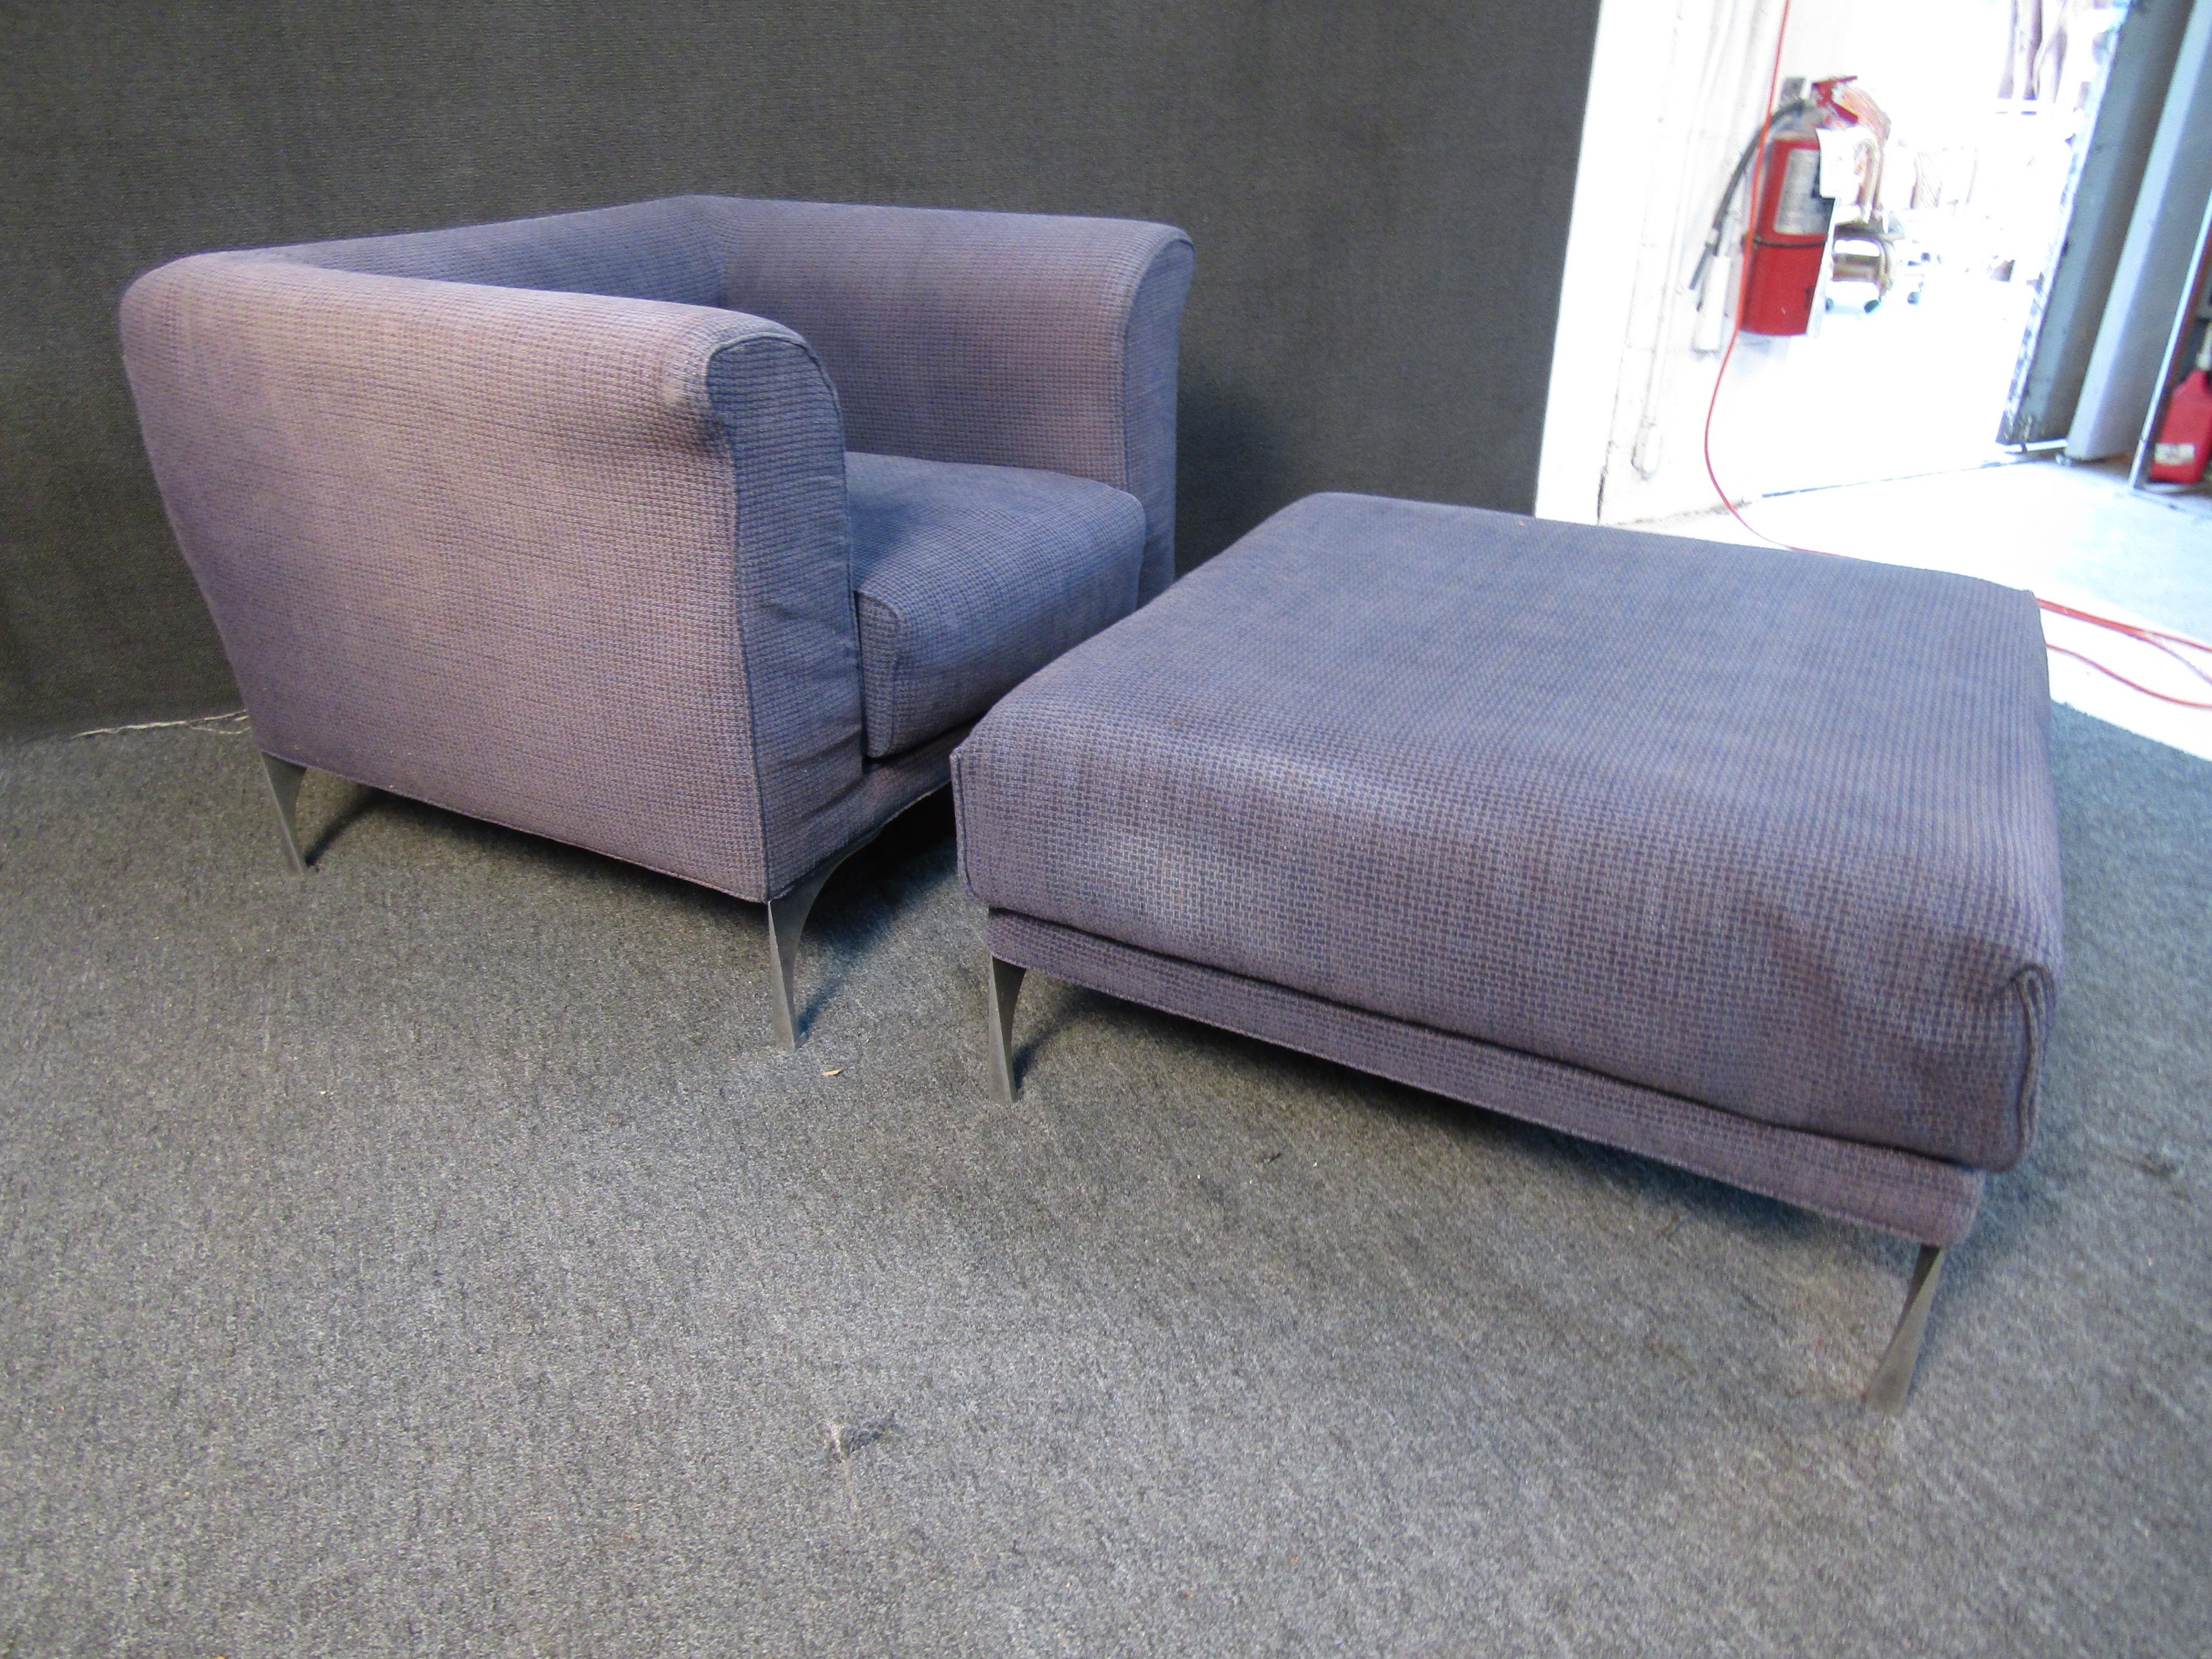 This vintage set by Roche Bobois features an oversized and cushioned club chair, as well as a large ottoman. Durable purple upholstery and metal legs make up the quality materials to complement a unique Mid-Century Modern design. Please confirm item